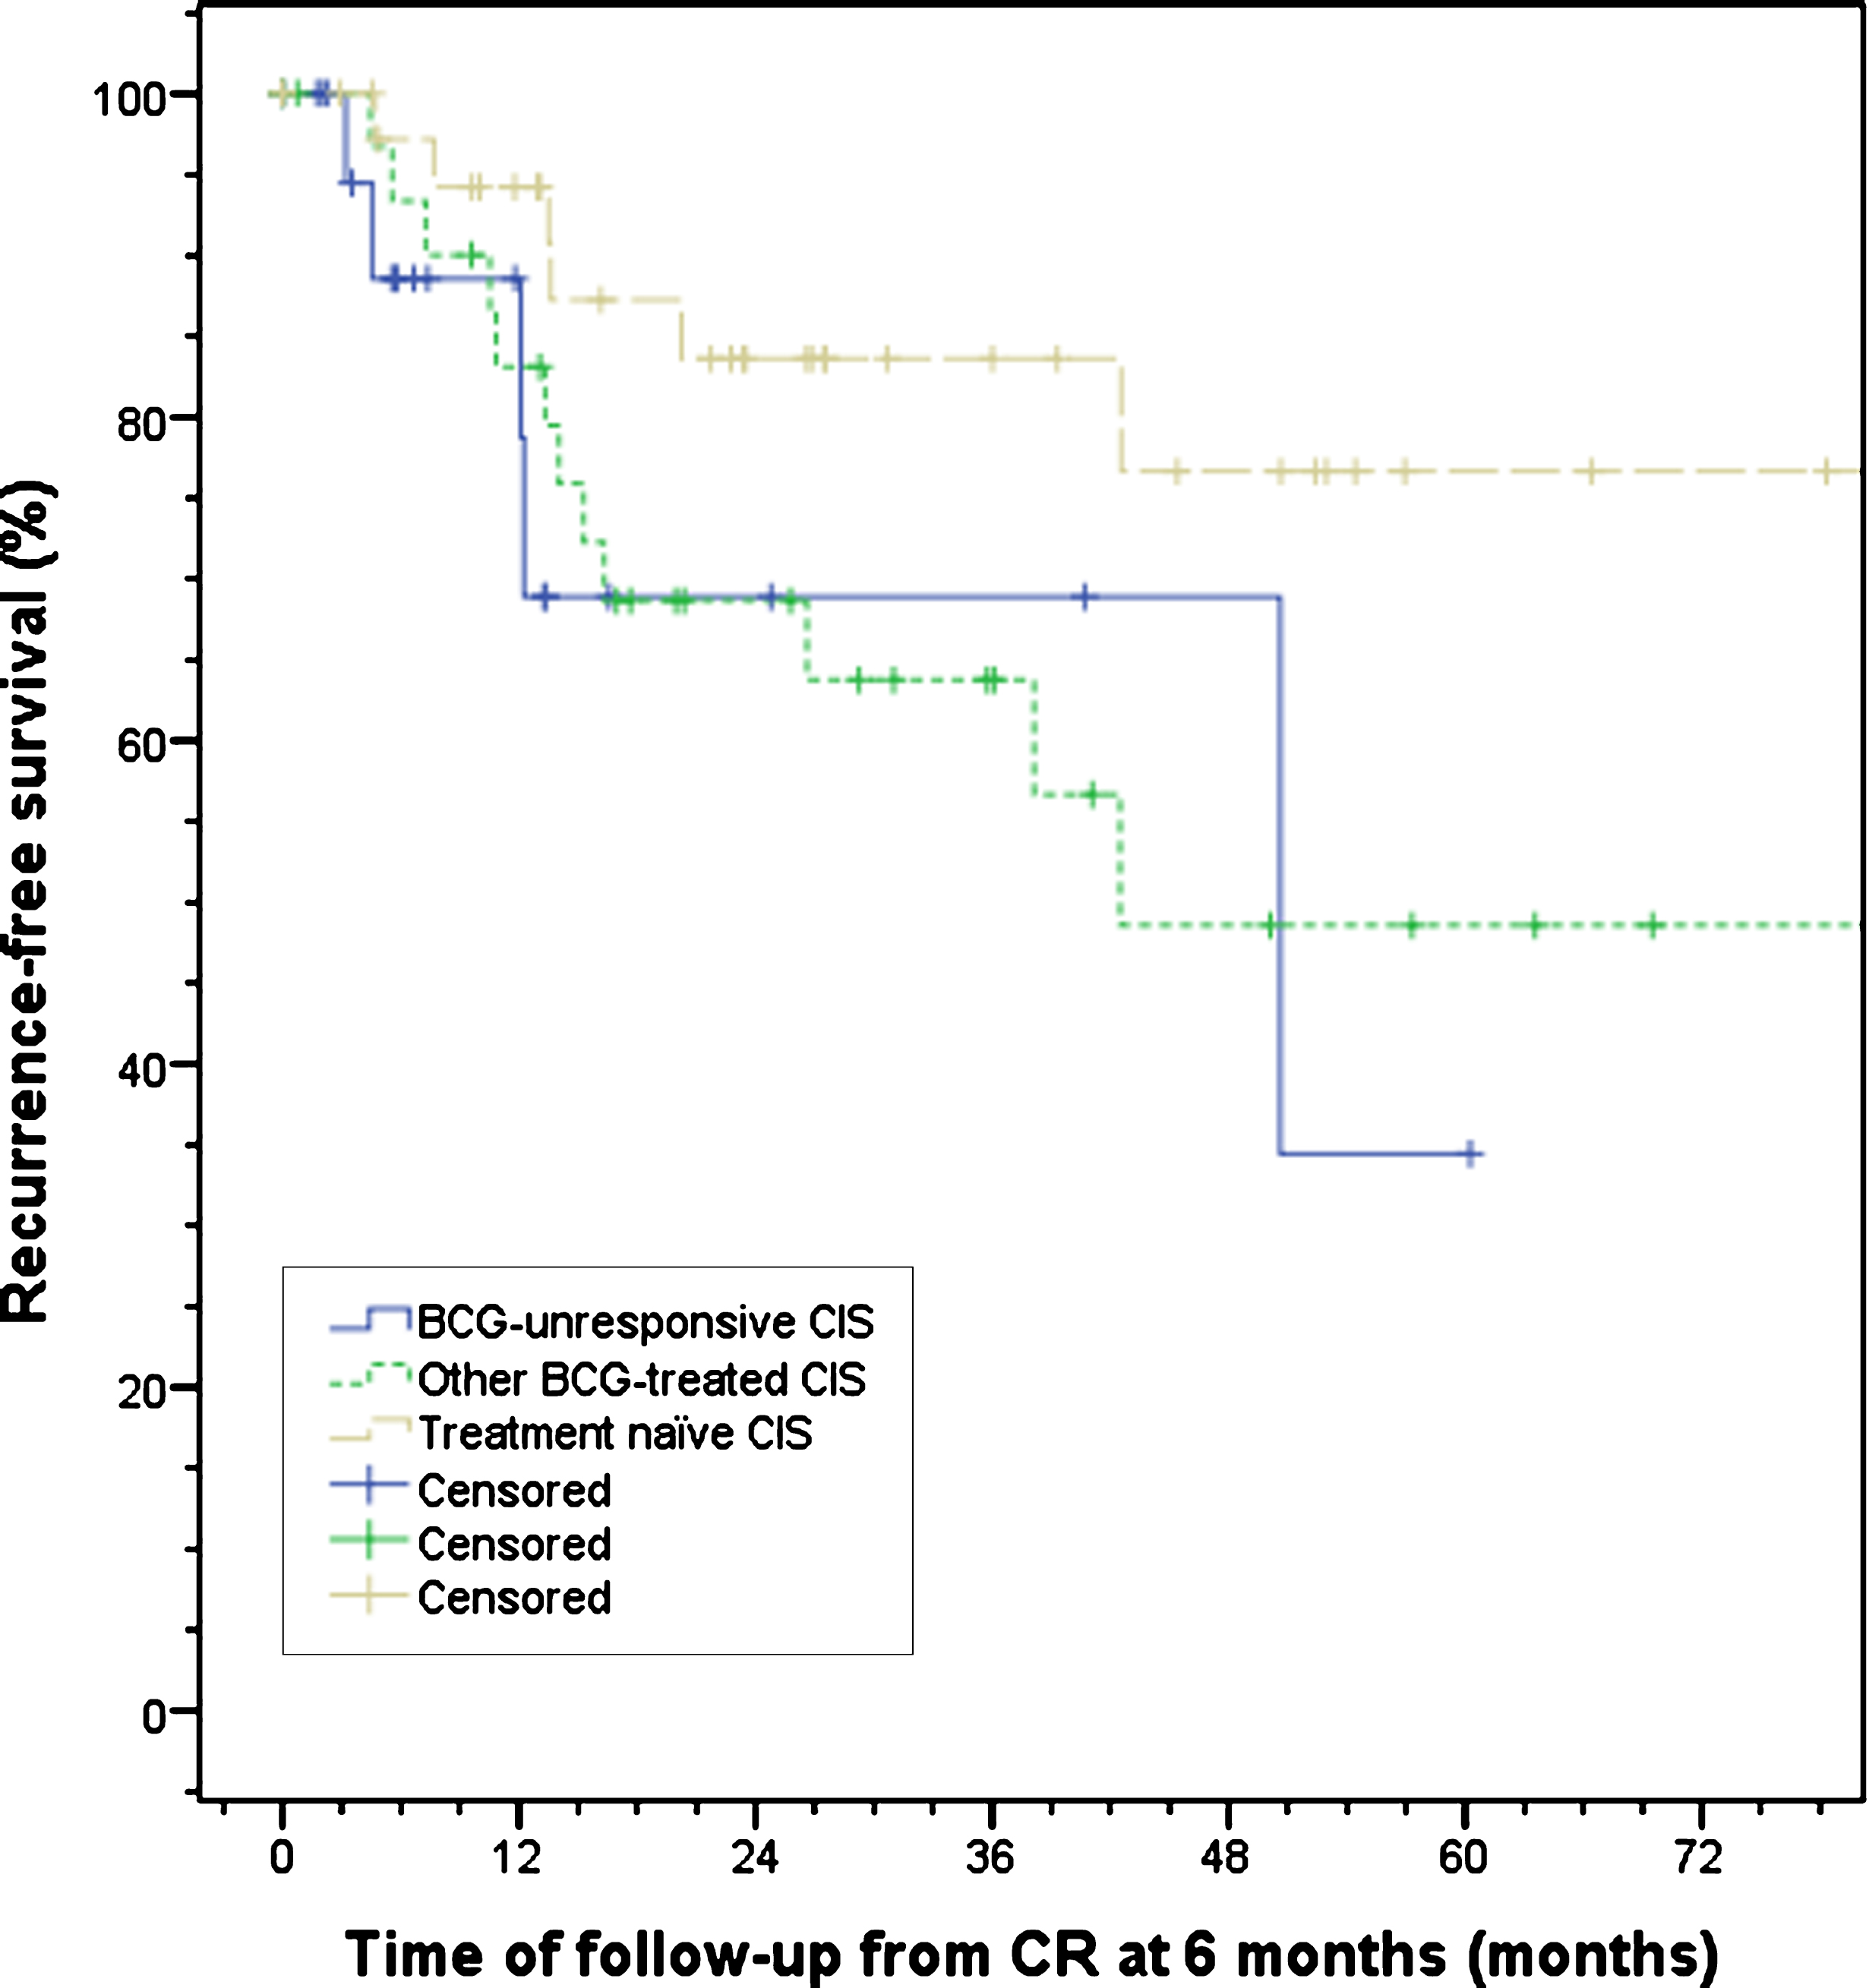 Recurrence-free survival after RF-CHT split by treatment history. No significant difference between BCG-unresponsive, other BCG-treated, and treatment naïve CIS patients was observed, p = 0.08. BCG, bacillus Calmette-Guérin; CIS, carcinoma in situ; CR, complete response; RF-CHT, radiofrequency-induced chemohyperthermia.